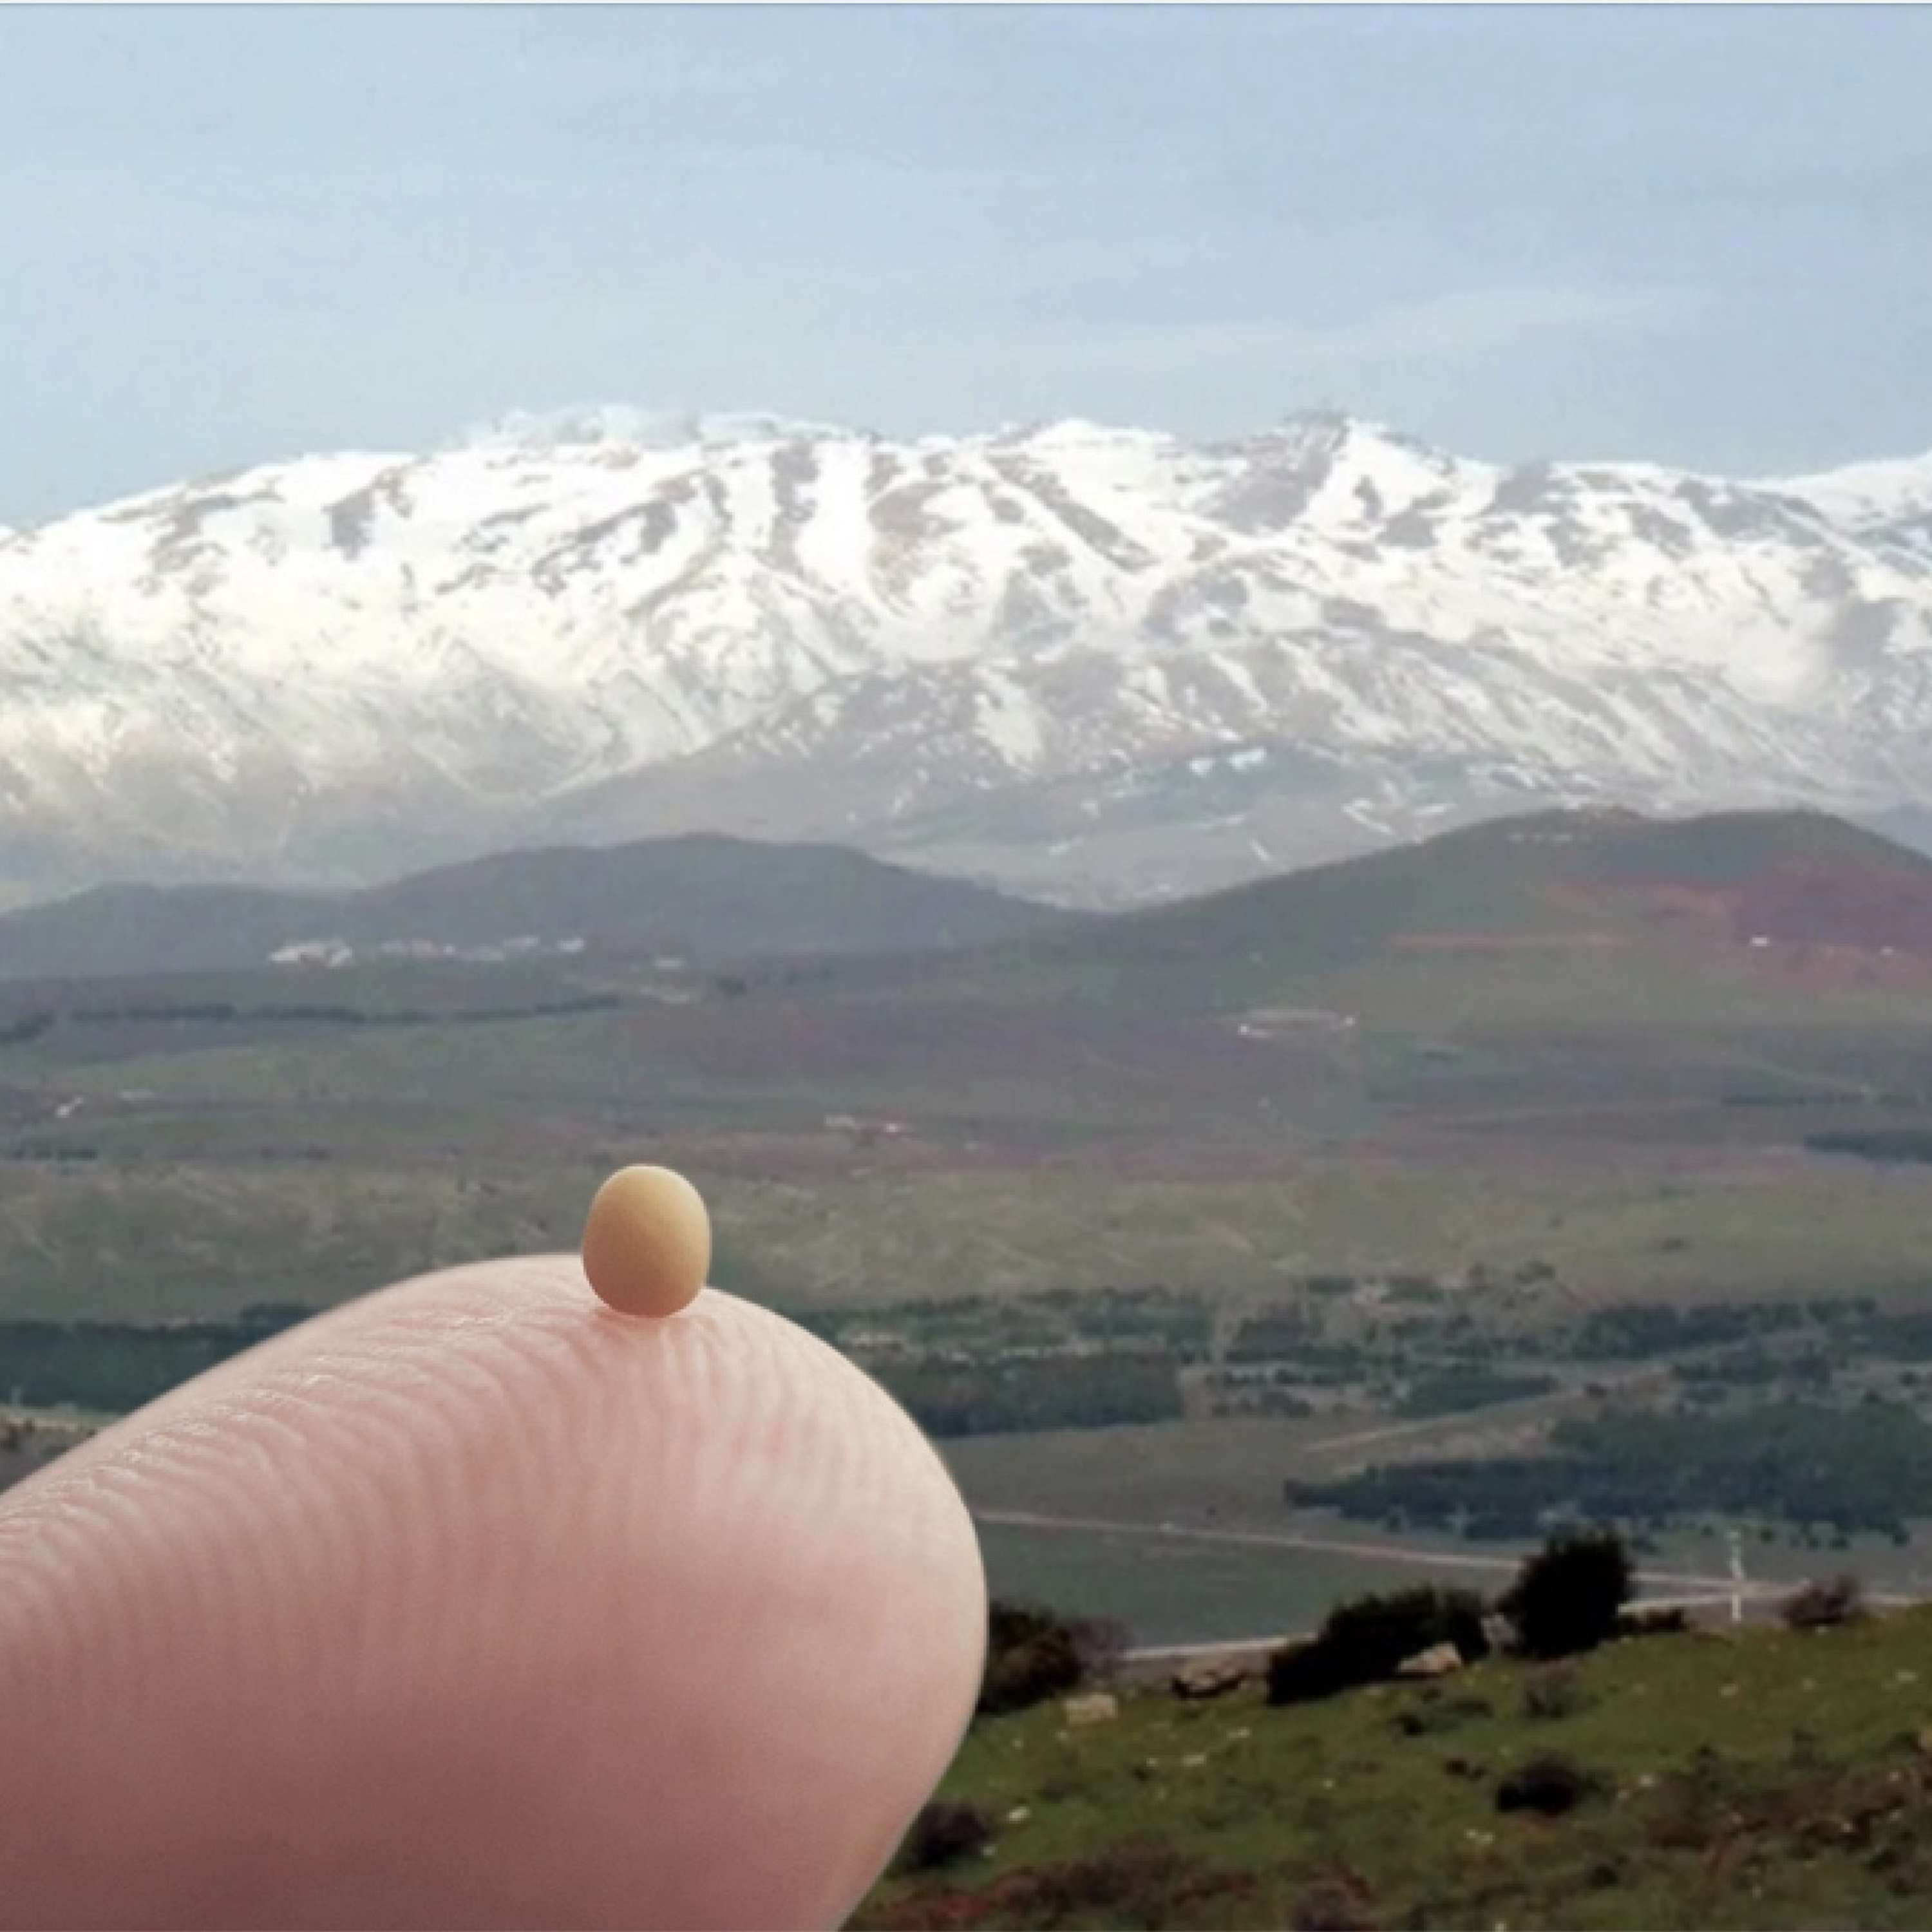 How to Move a Mountain with a Mustard Seed